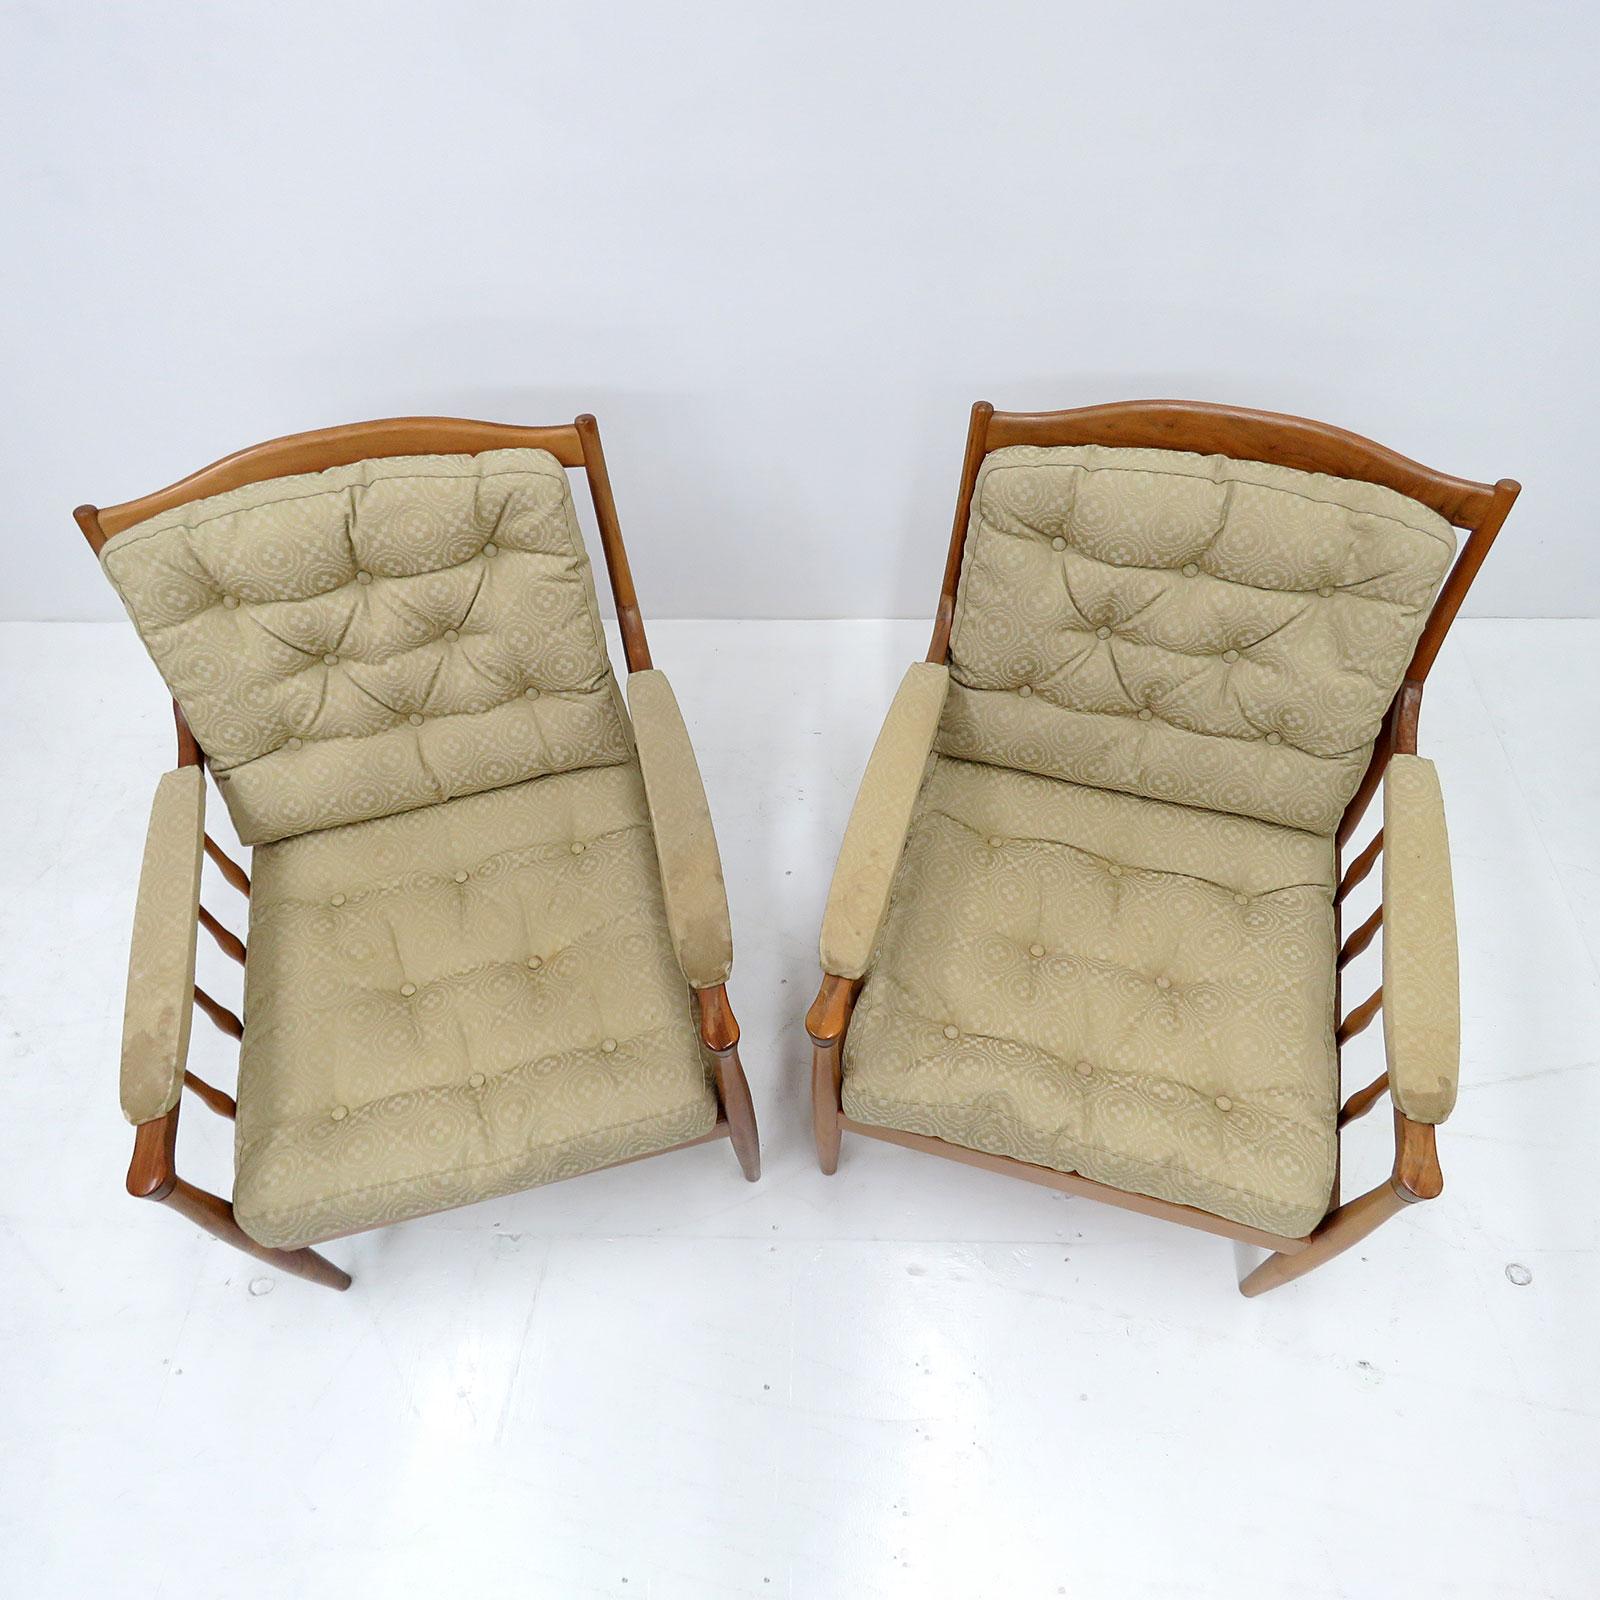 Armchairs by Kerstin Hörlin-Holmquist for OPE Möbler, 1960 In Good Condition For Sale In Los Angeles, CA